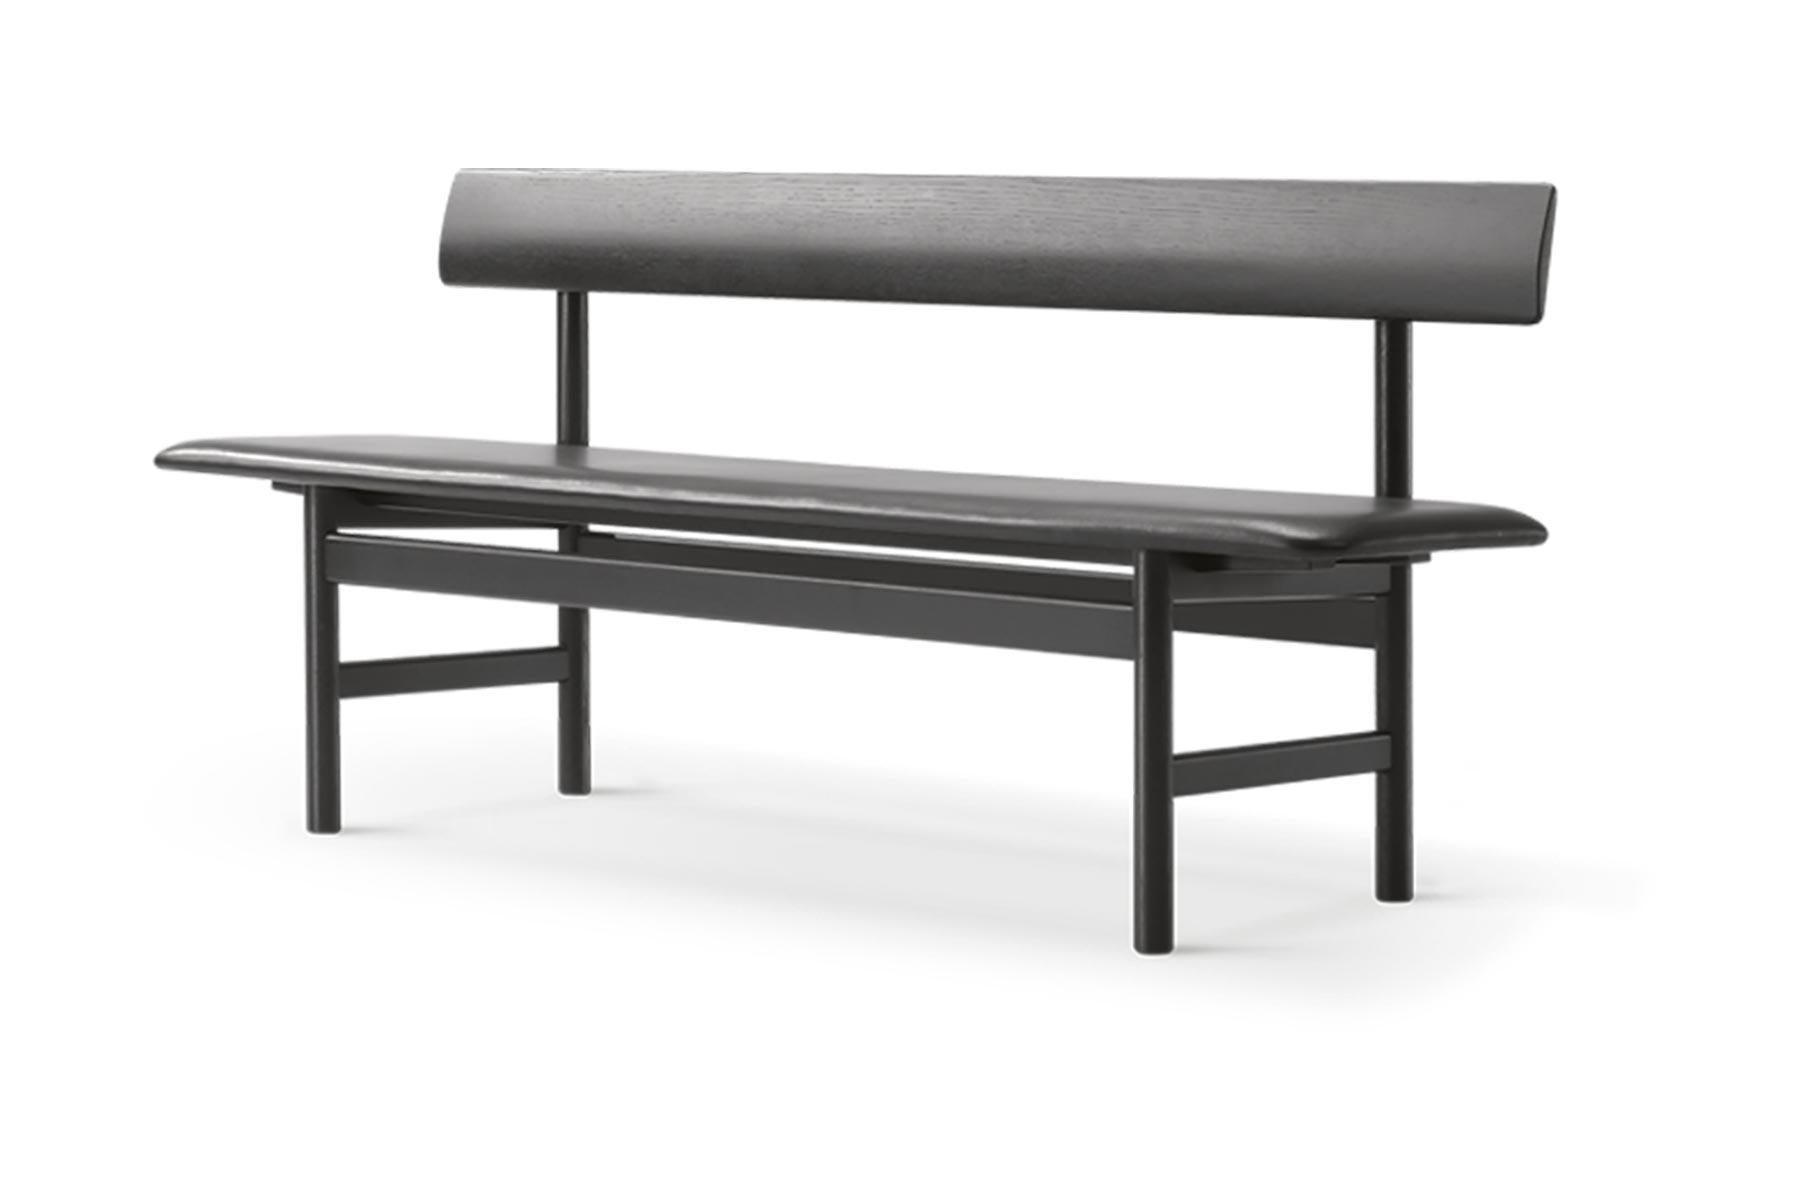 Børge Mogensen designed this solid wood dining bench in 1956. With its robust simplicity the bench is an ideal example of Mogensen’s lifelong drive for a purified shape.

Inquire for leather or fabric upholstery options.

